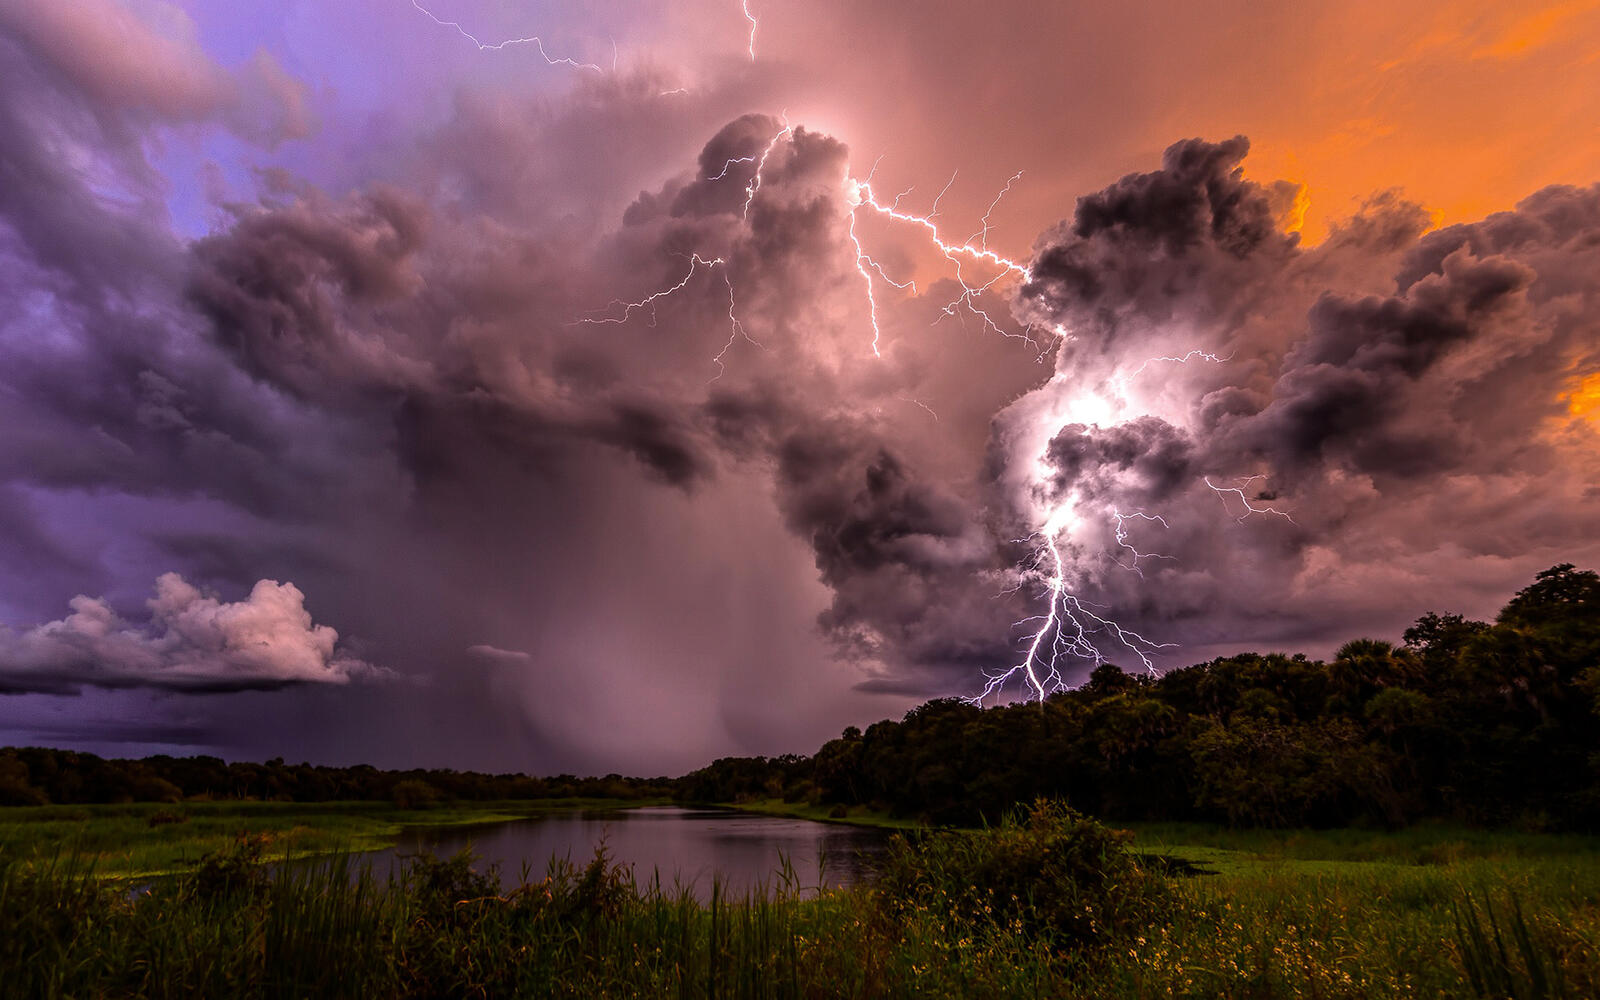 Wallpapers clouds lightning nature on the desktop